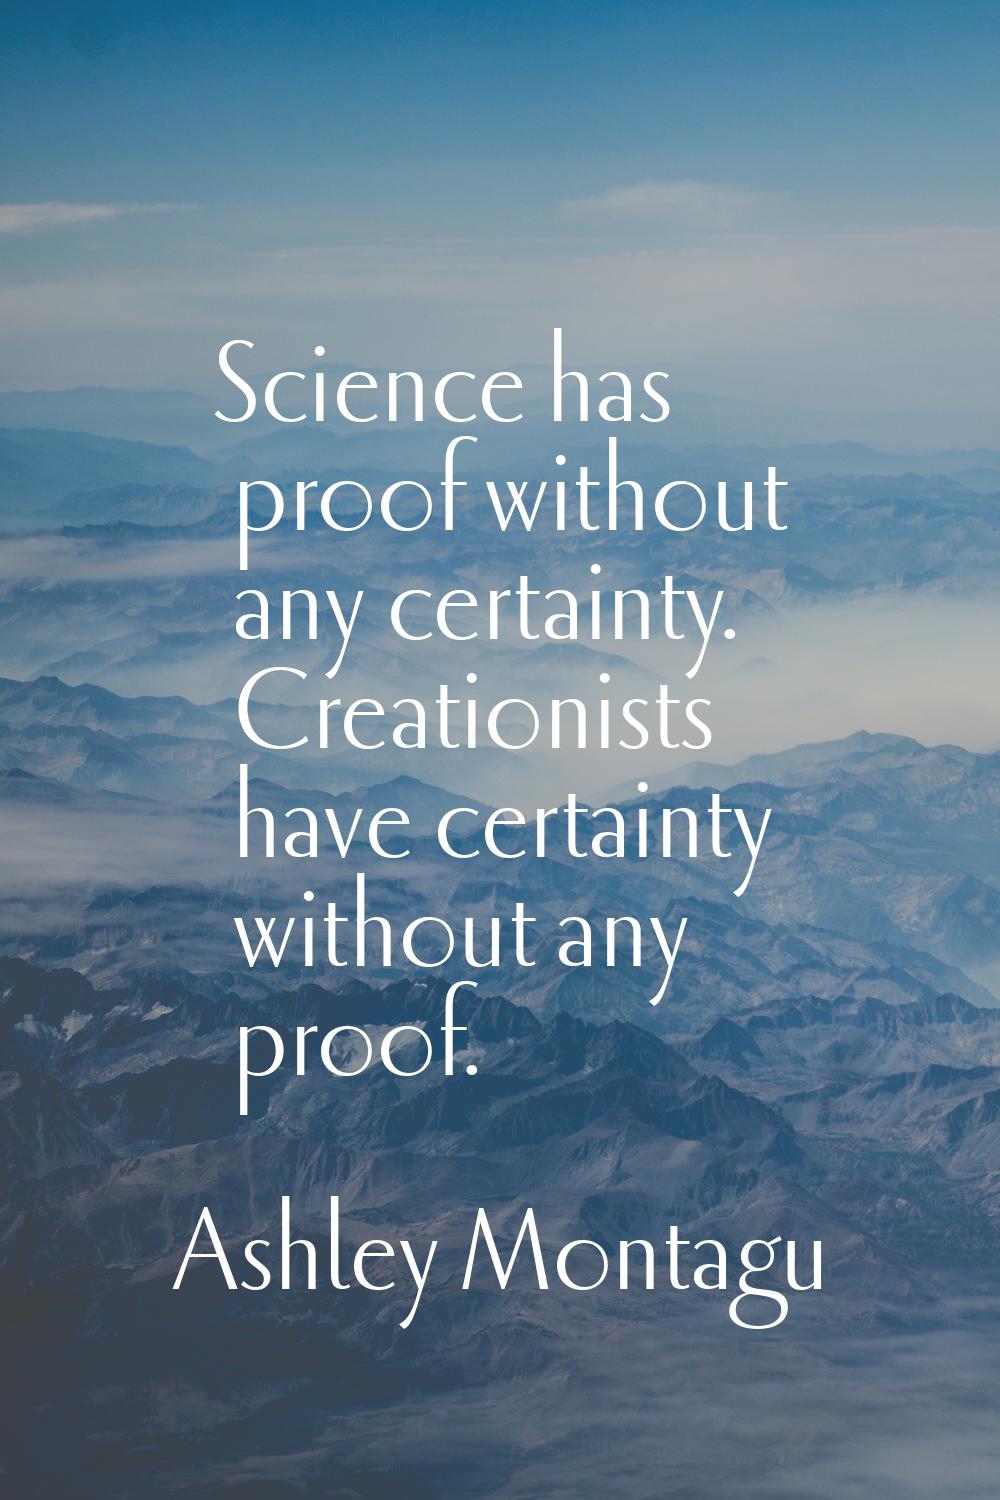 Science has proof without any certainty. Creationists have certainty without any proof.